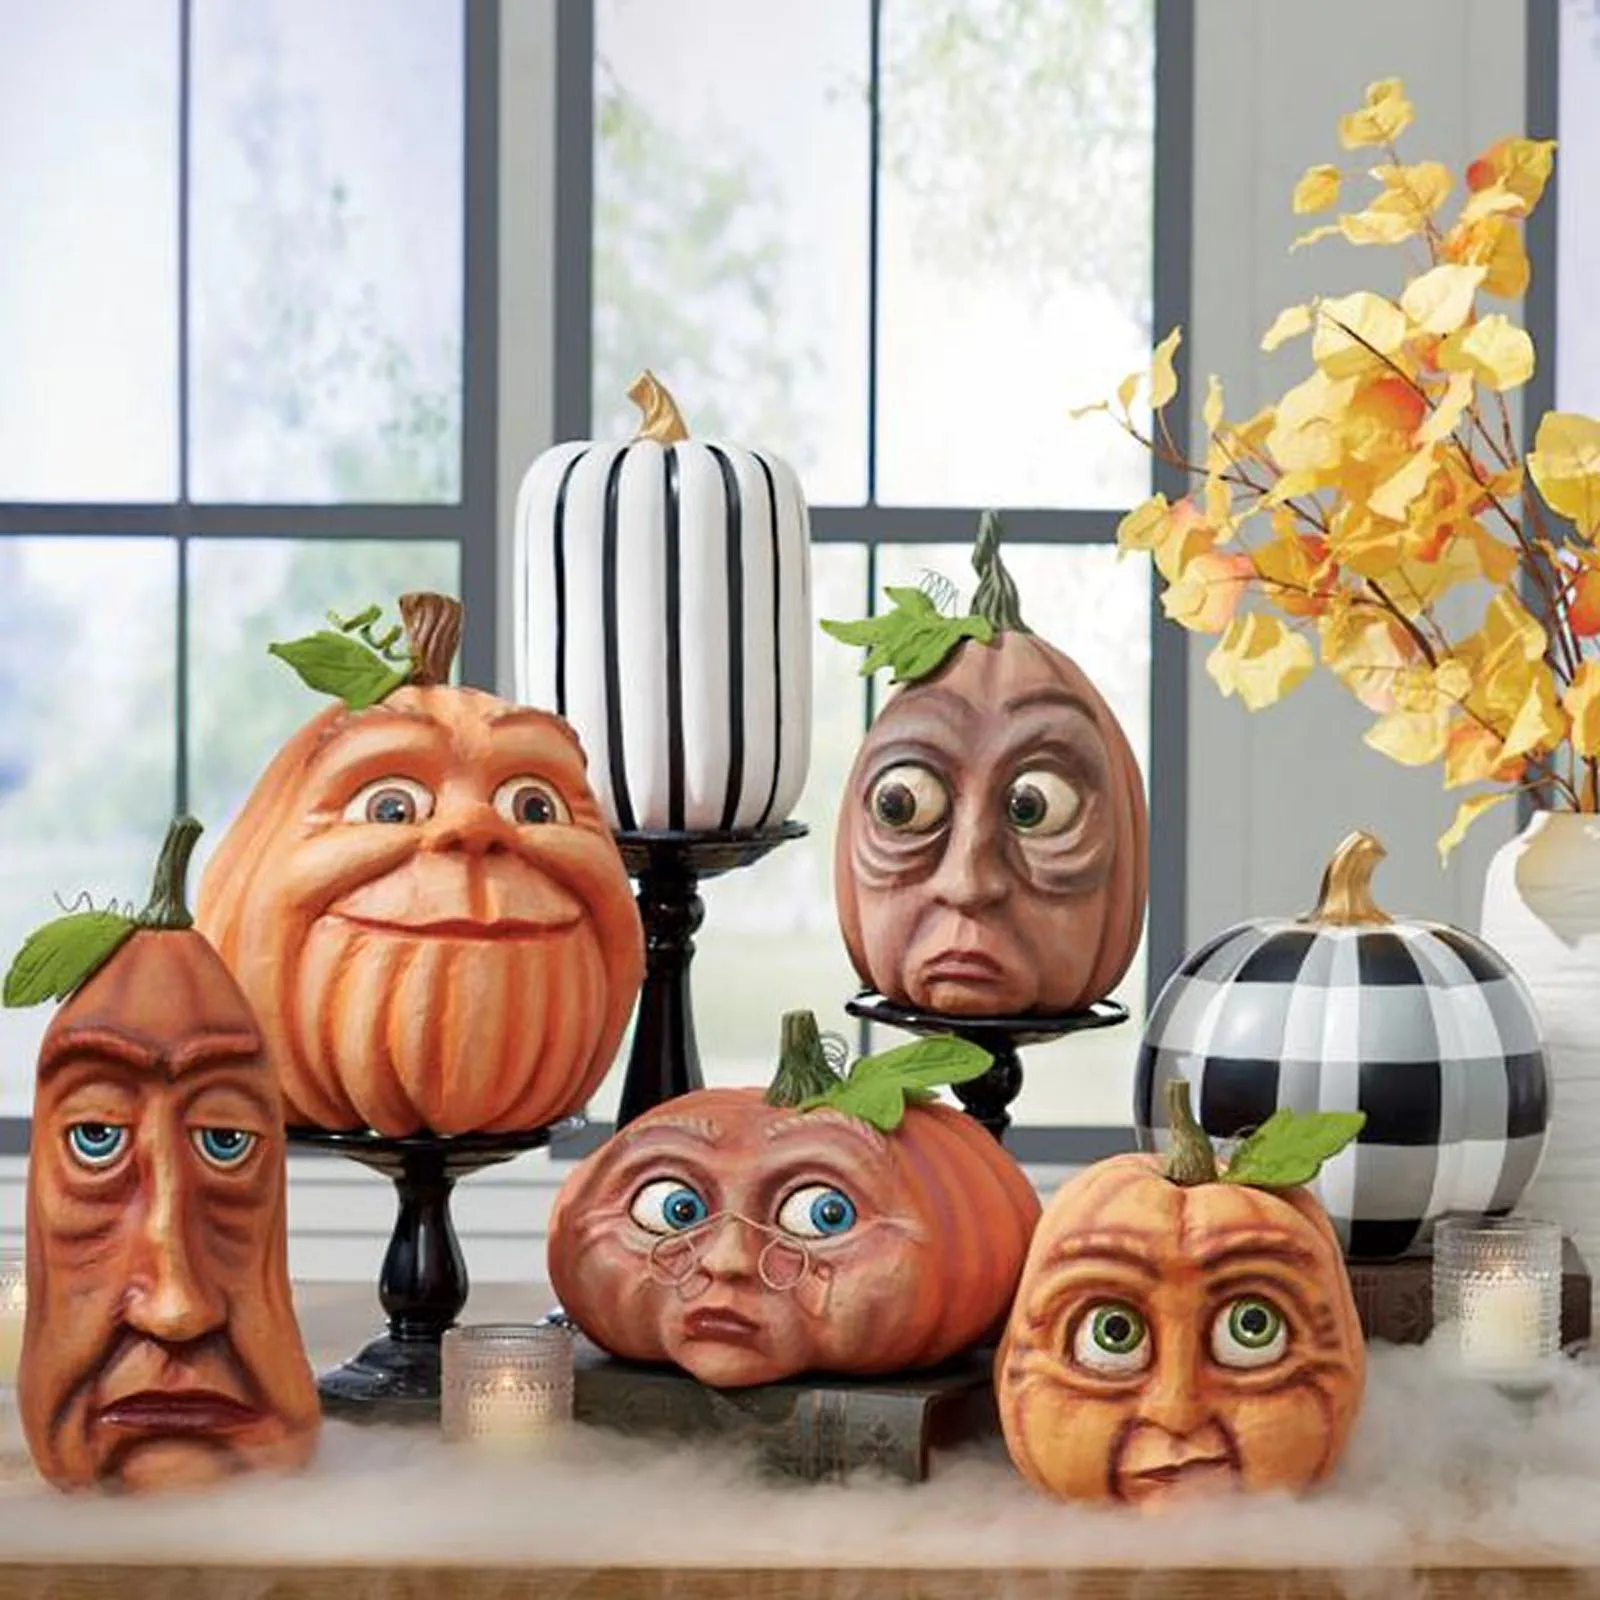 2021 Expressive Big Eye Pumpkin Family Decoration Halloween Decorations for Party Family